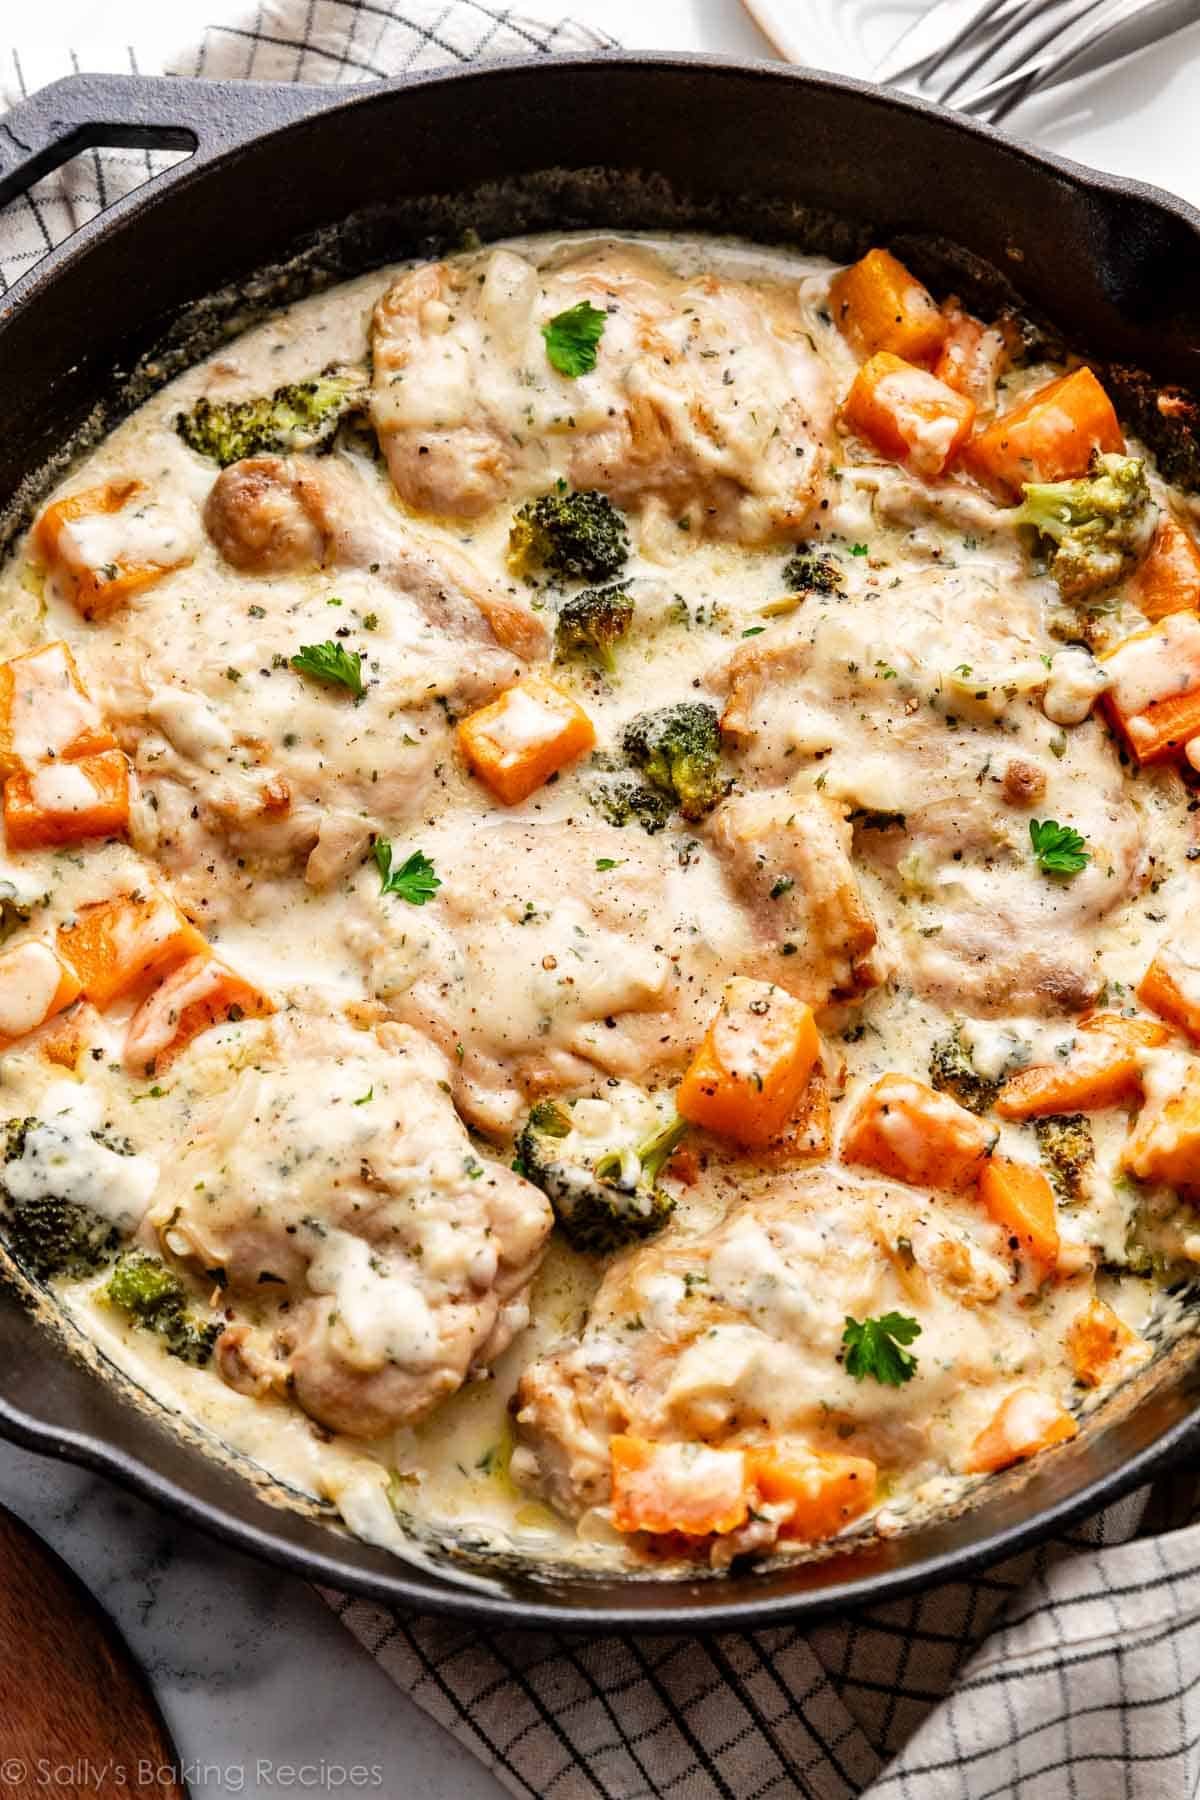 chicken, broccoli, and butternut squash in creamy garlic sauce with fresh parsley in cast iron skillet.